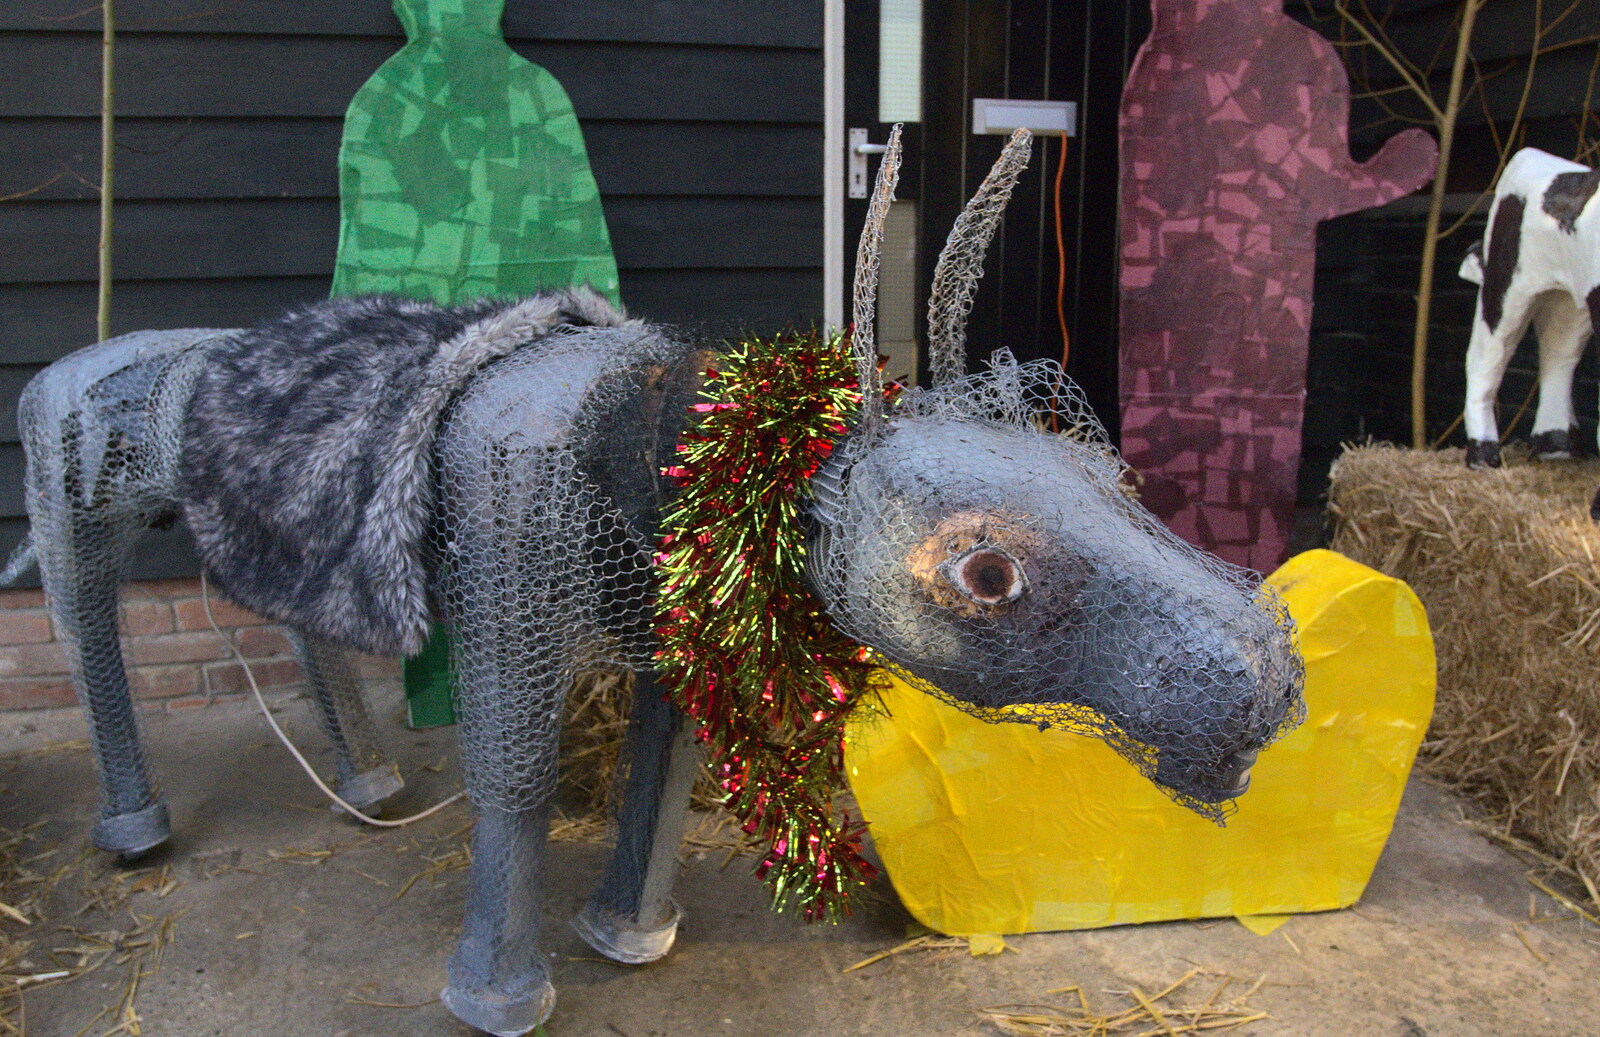 A robot donkey with light-up eyes from Thornham Crafts and a Qualcomm Christmas, Cambridge and Suffolk - 10th December 2012